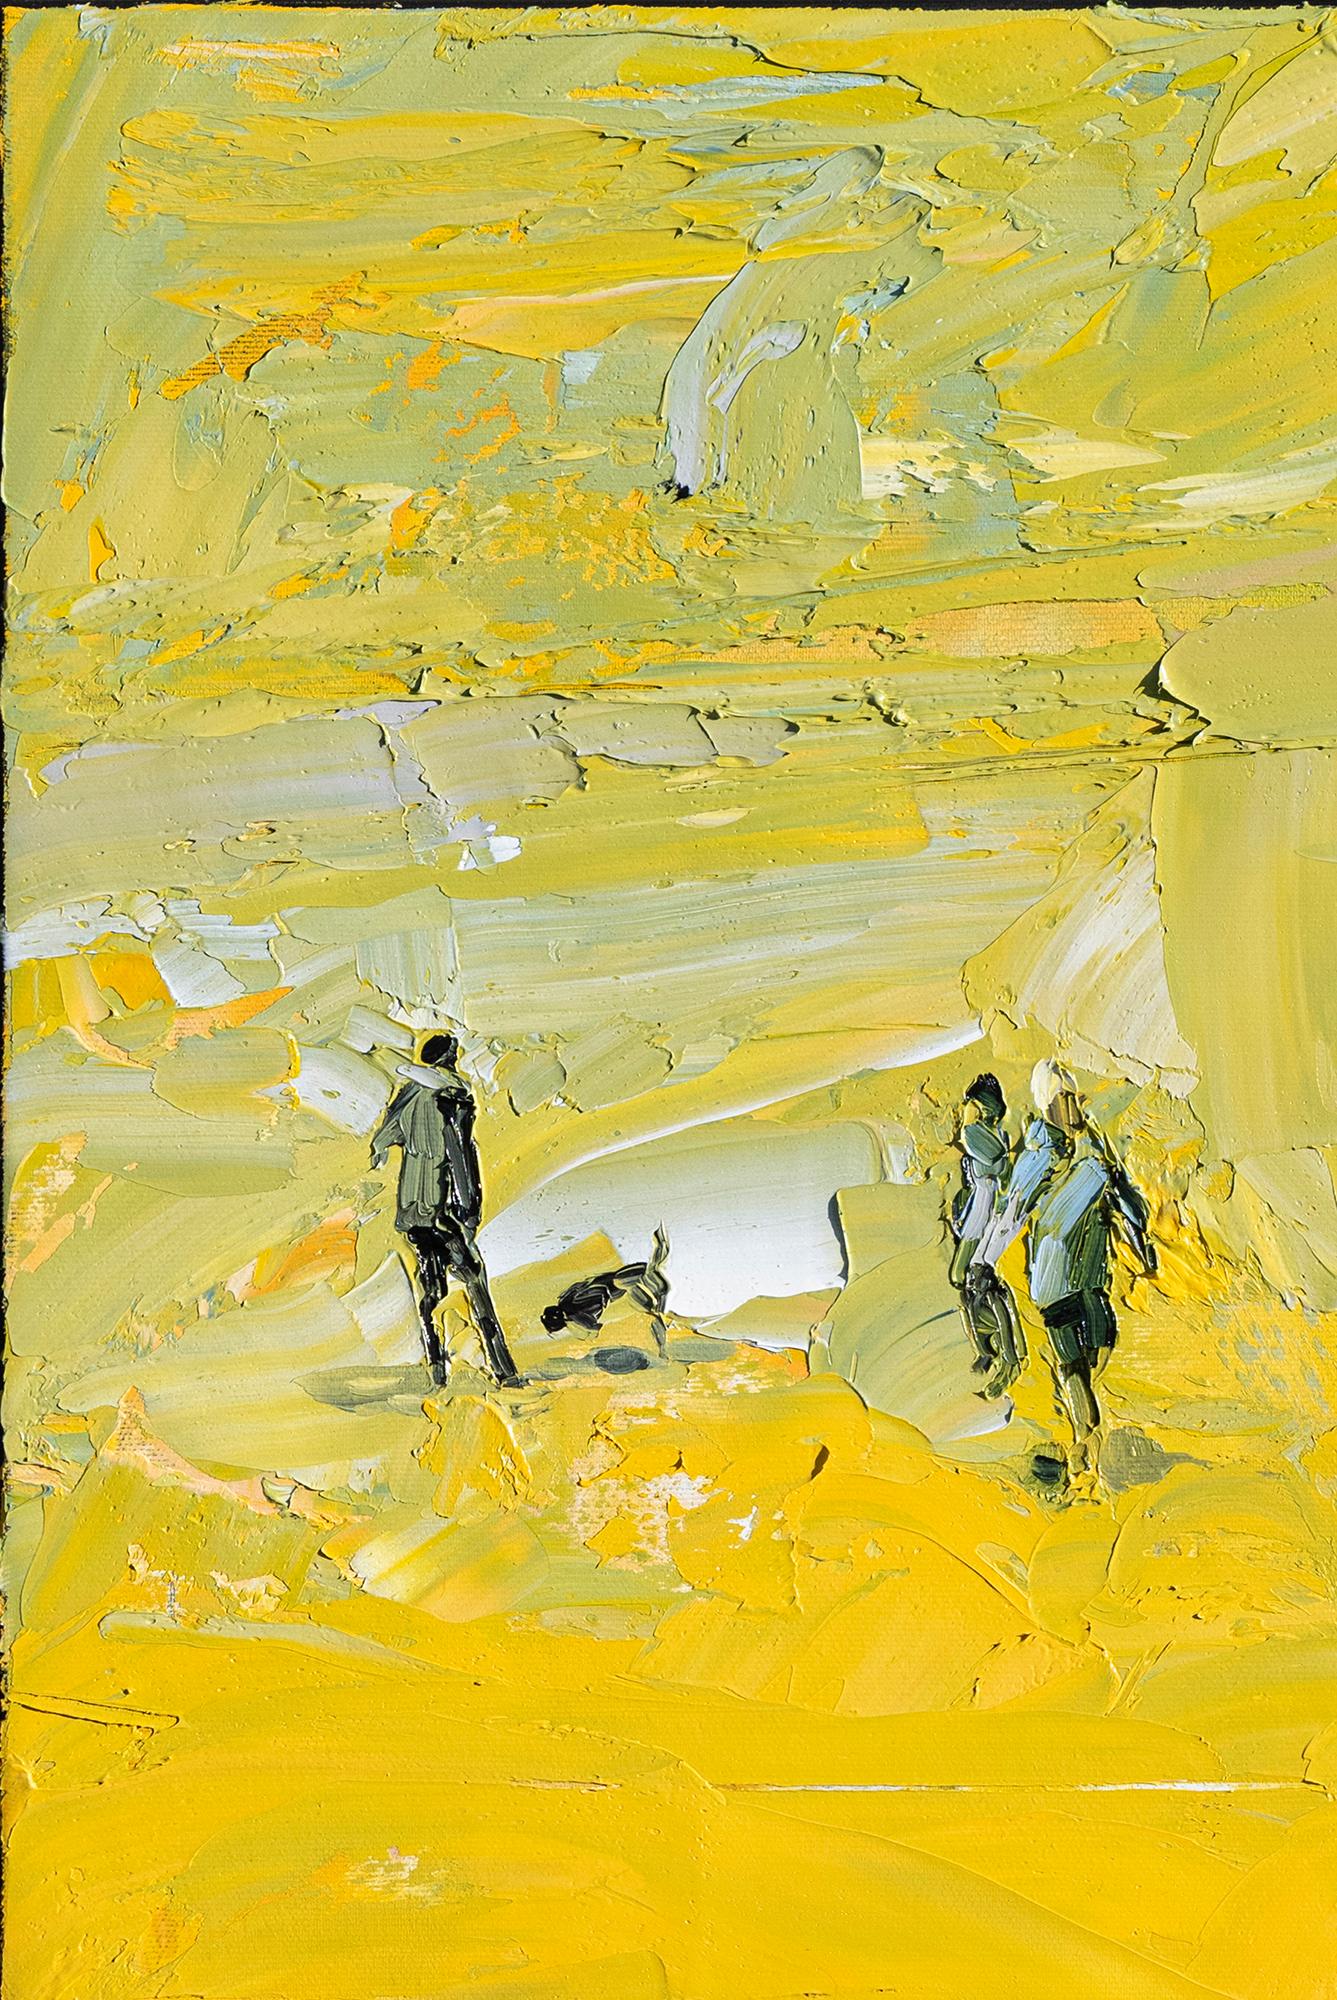 Weltreise 
90 x 60 cm
oil on canvas 
2020

A wide, apparently endless plain forms the background of the events: out of nowhere, dark figures enter the scenery, as if coming from the depths of the canvas, appearing through layers of bright, shiny